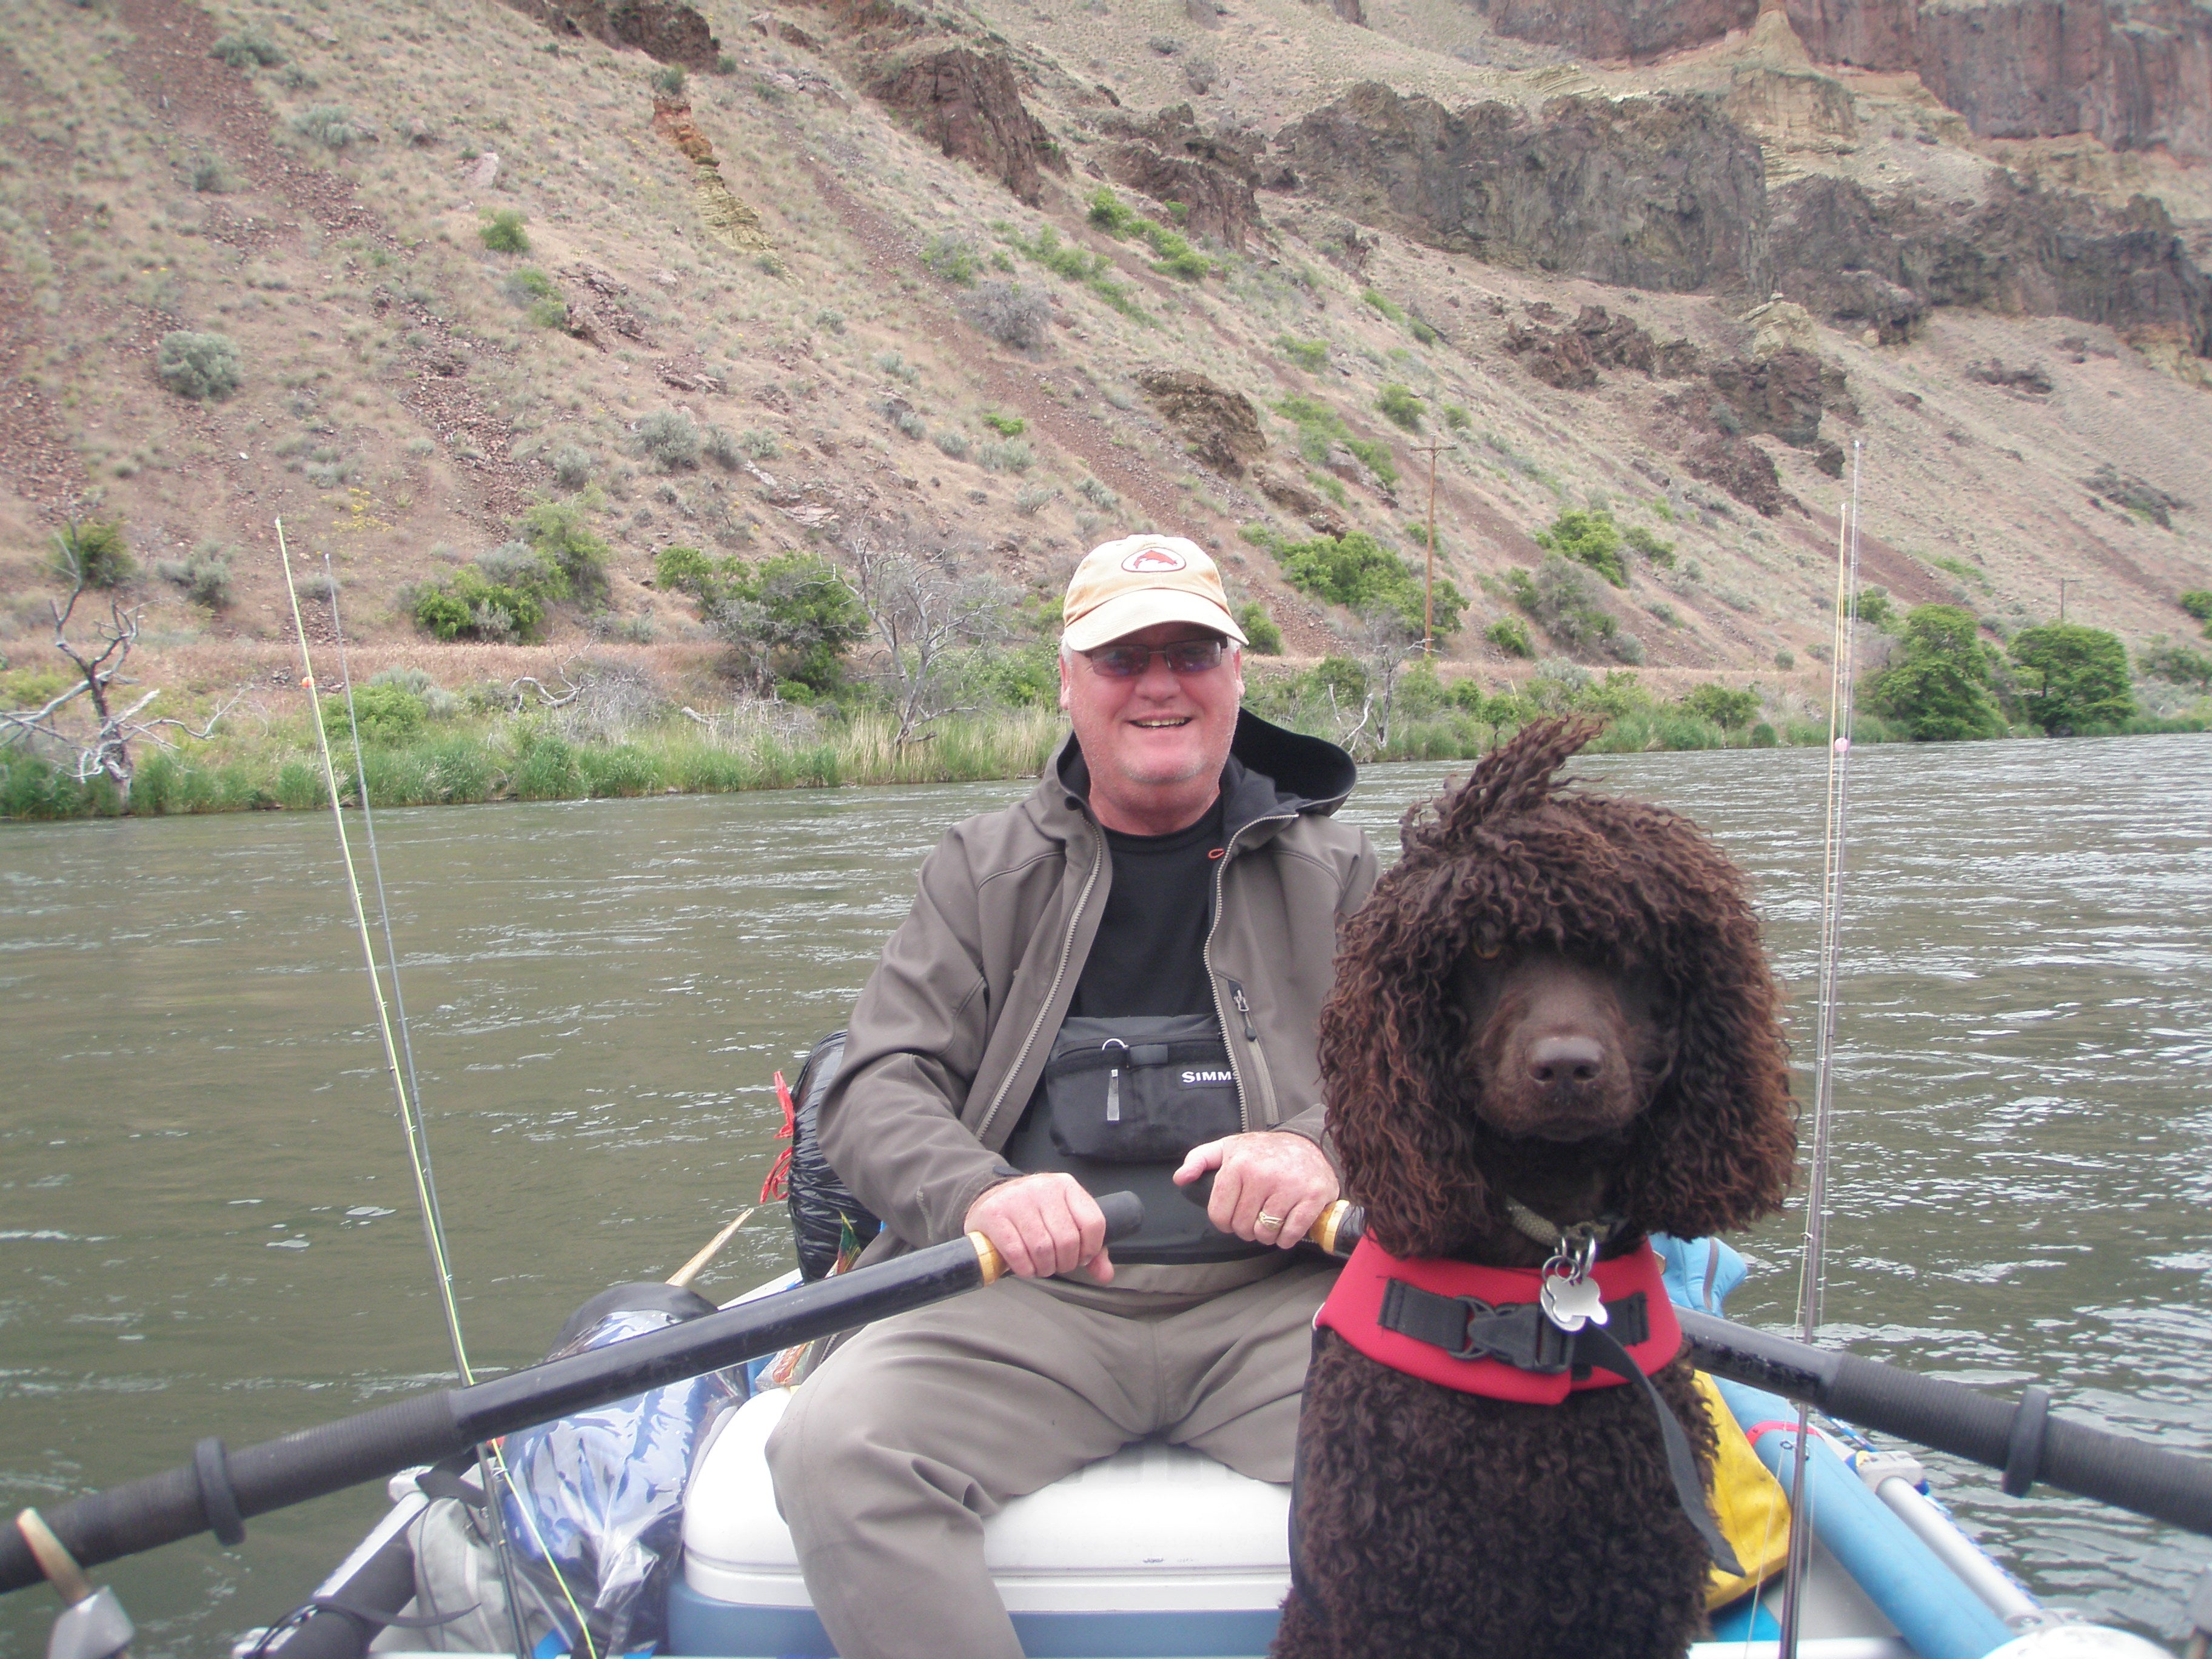 Clell and dog Midge on a boat in the river